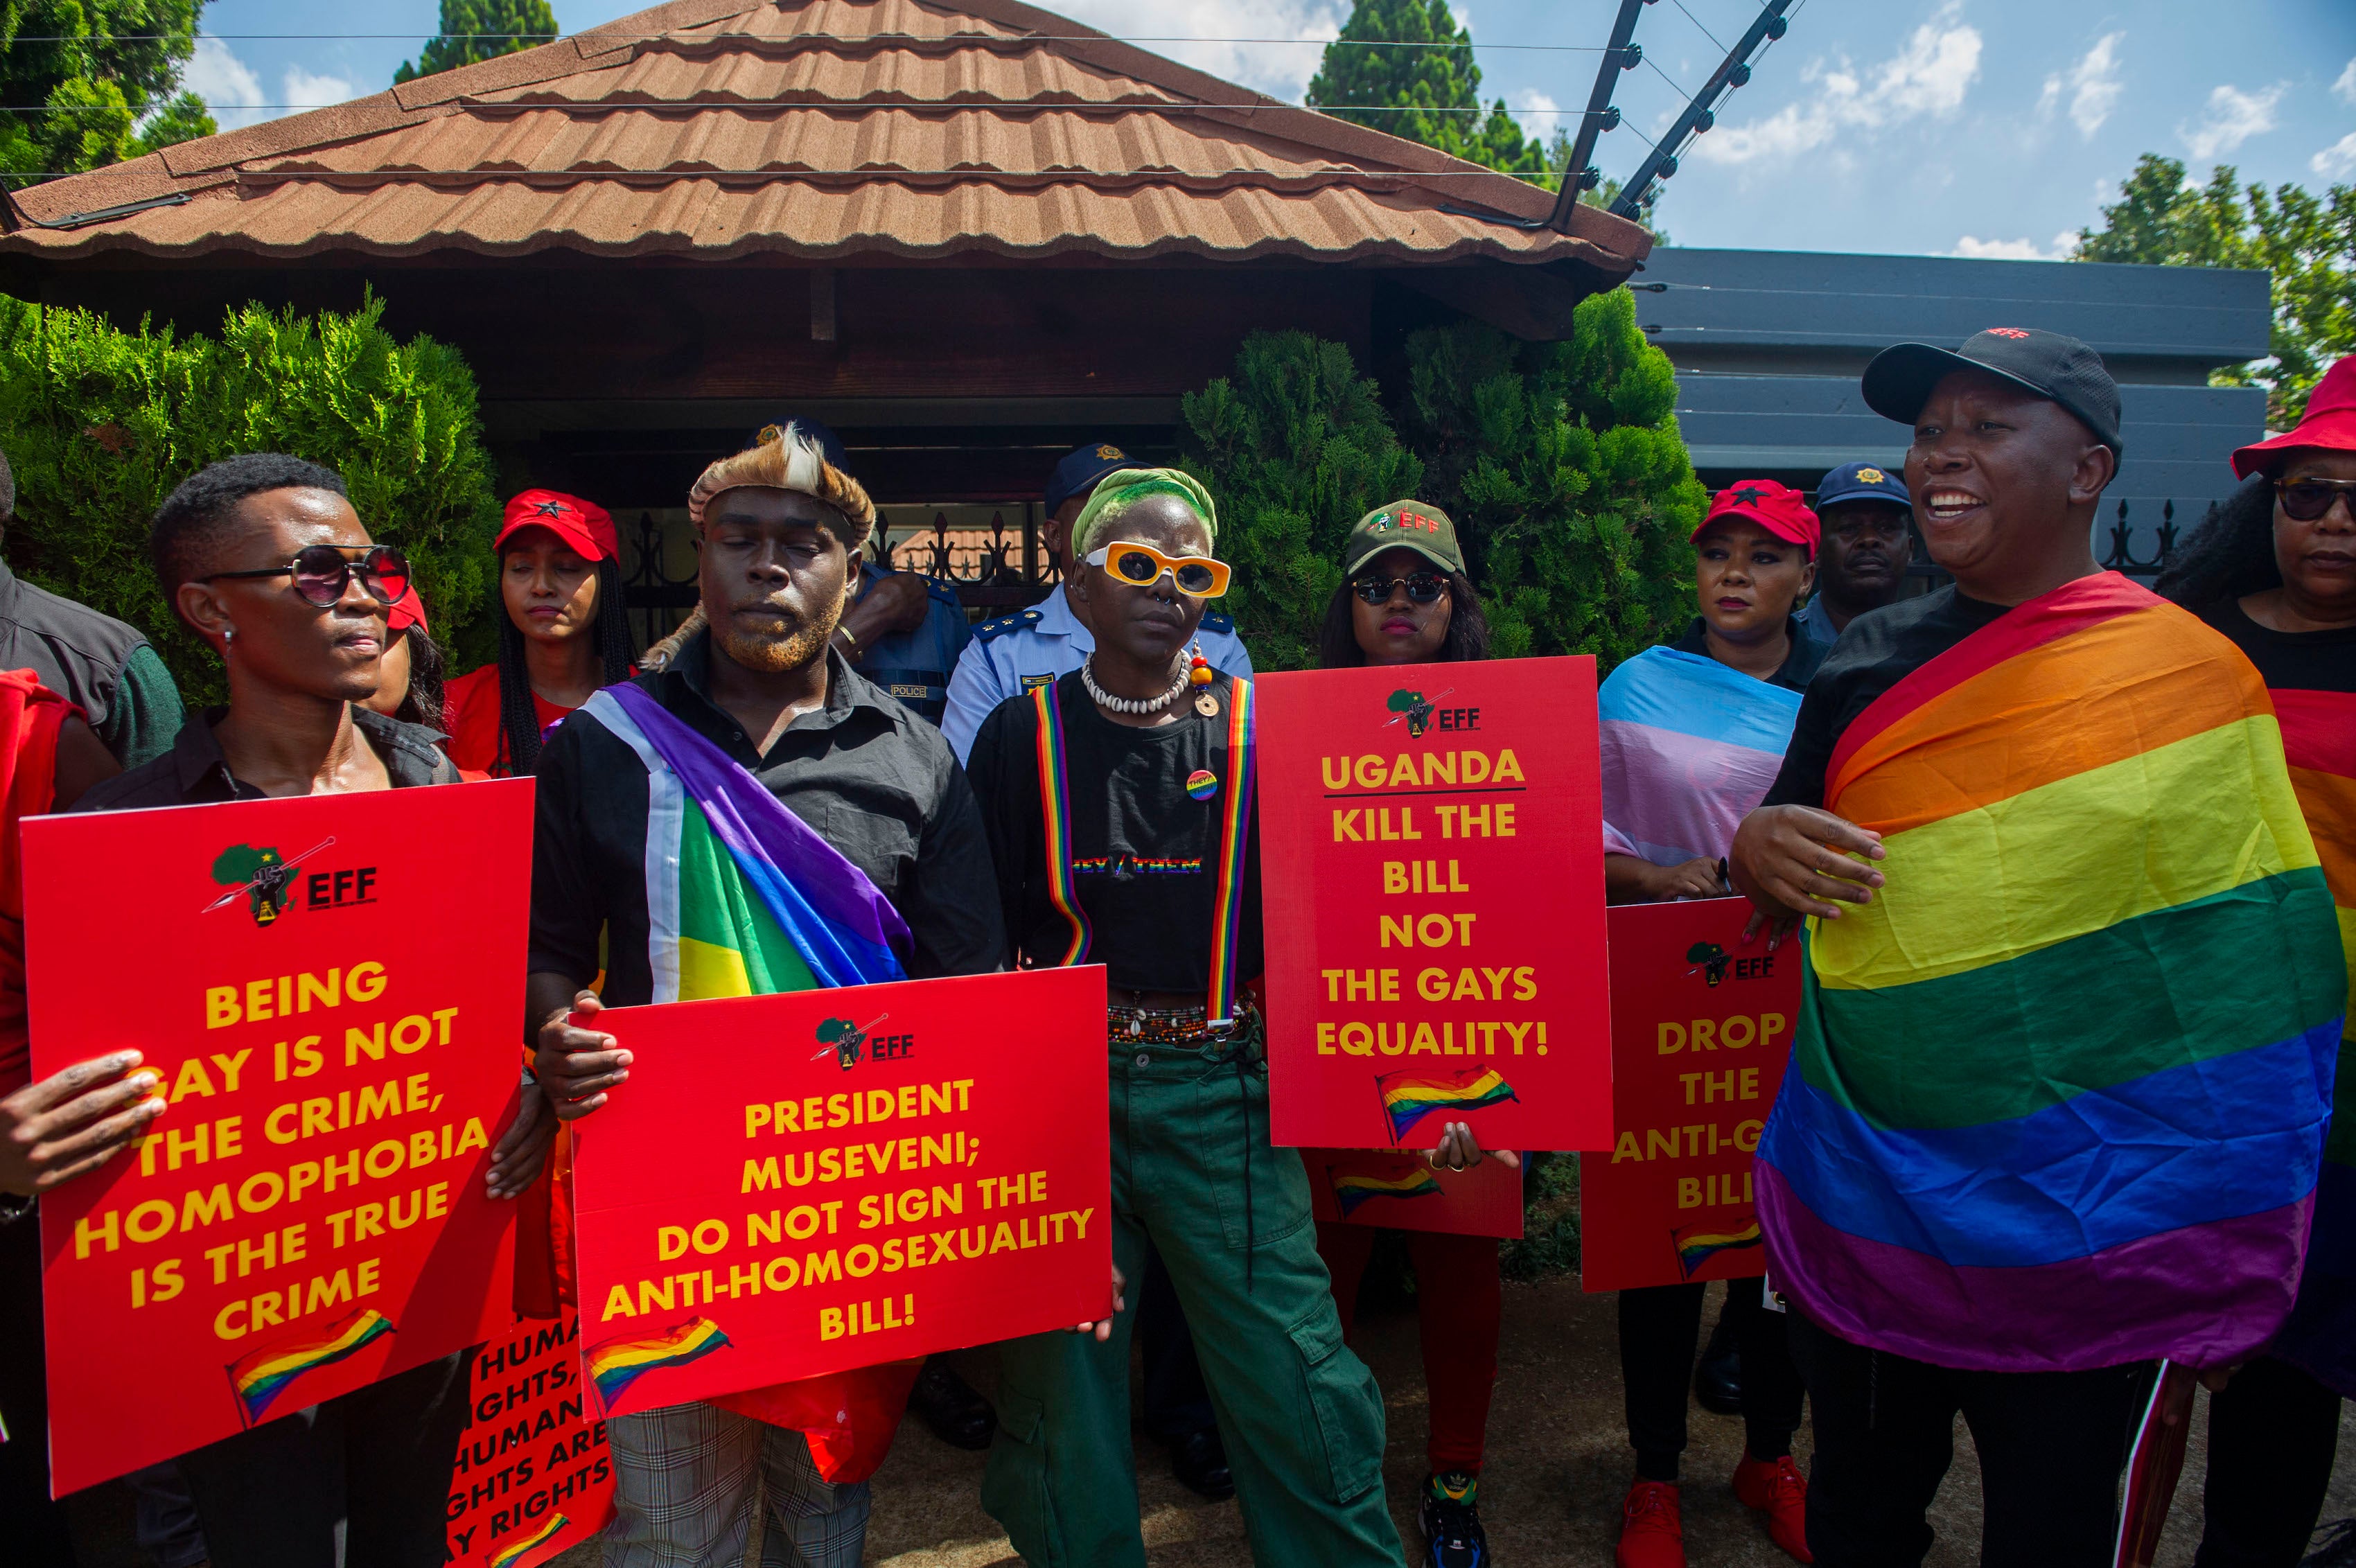 Members of an opposition party picket against Uganda's anti-homosexuality bill at the Uganda High Commission in Pretoria, South Africa, April 4, 2023.